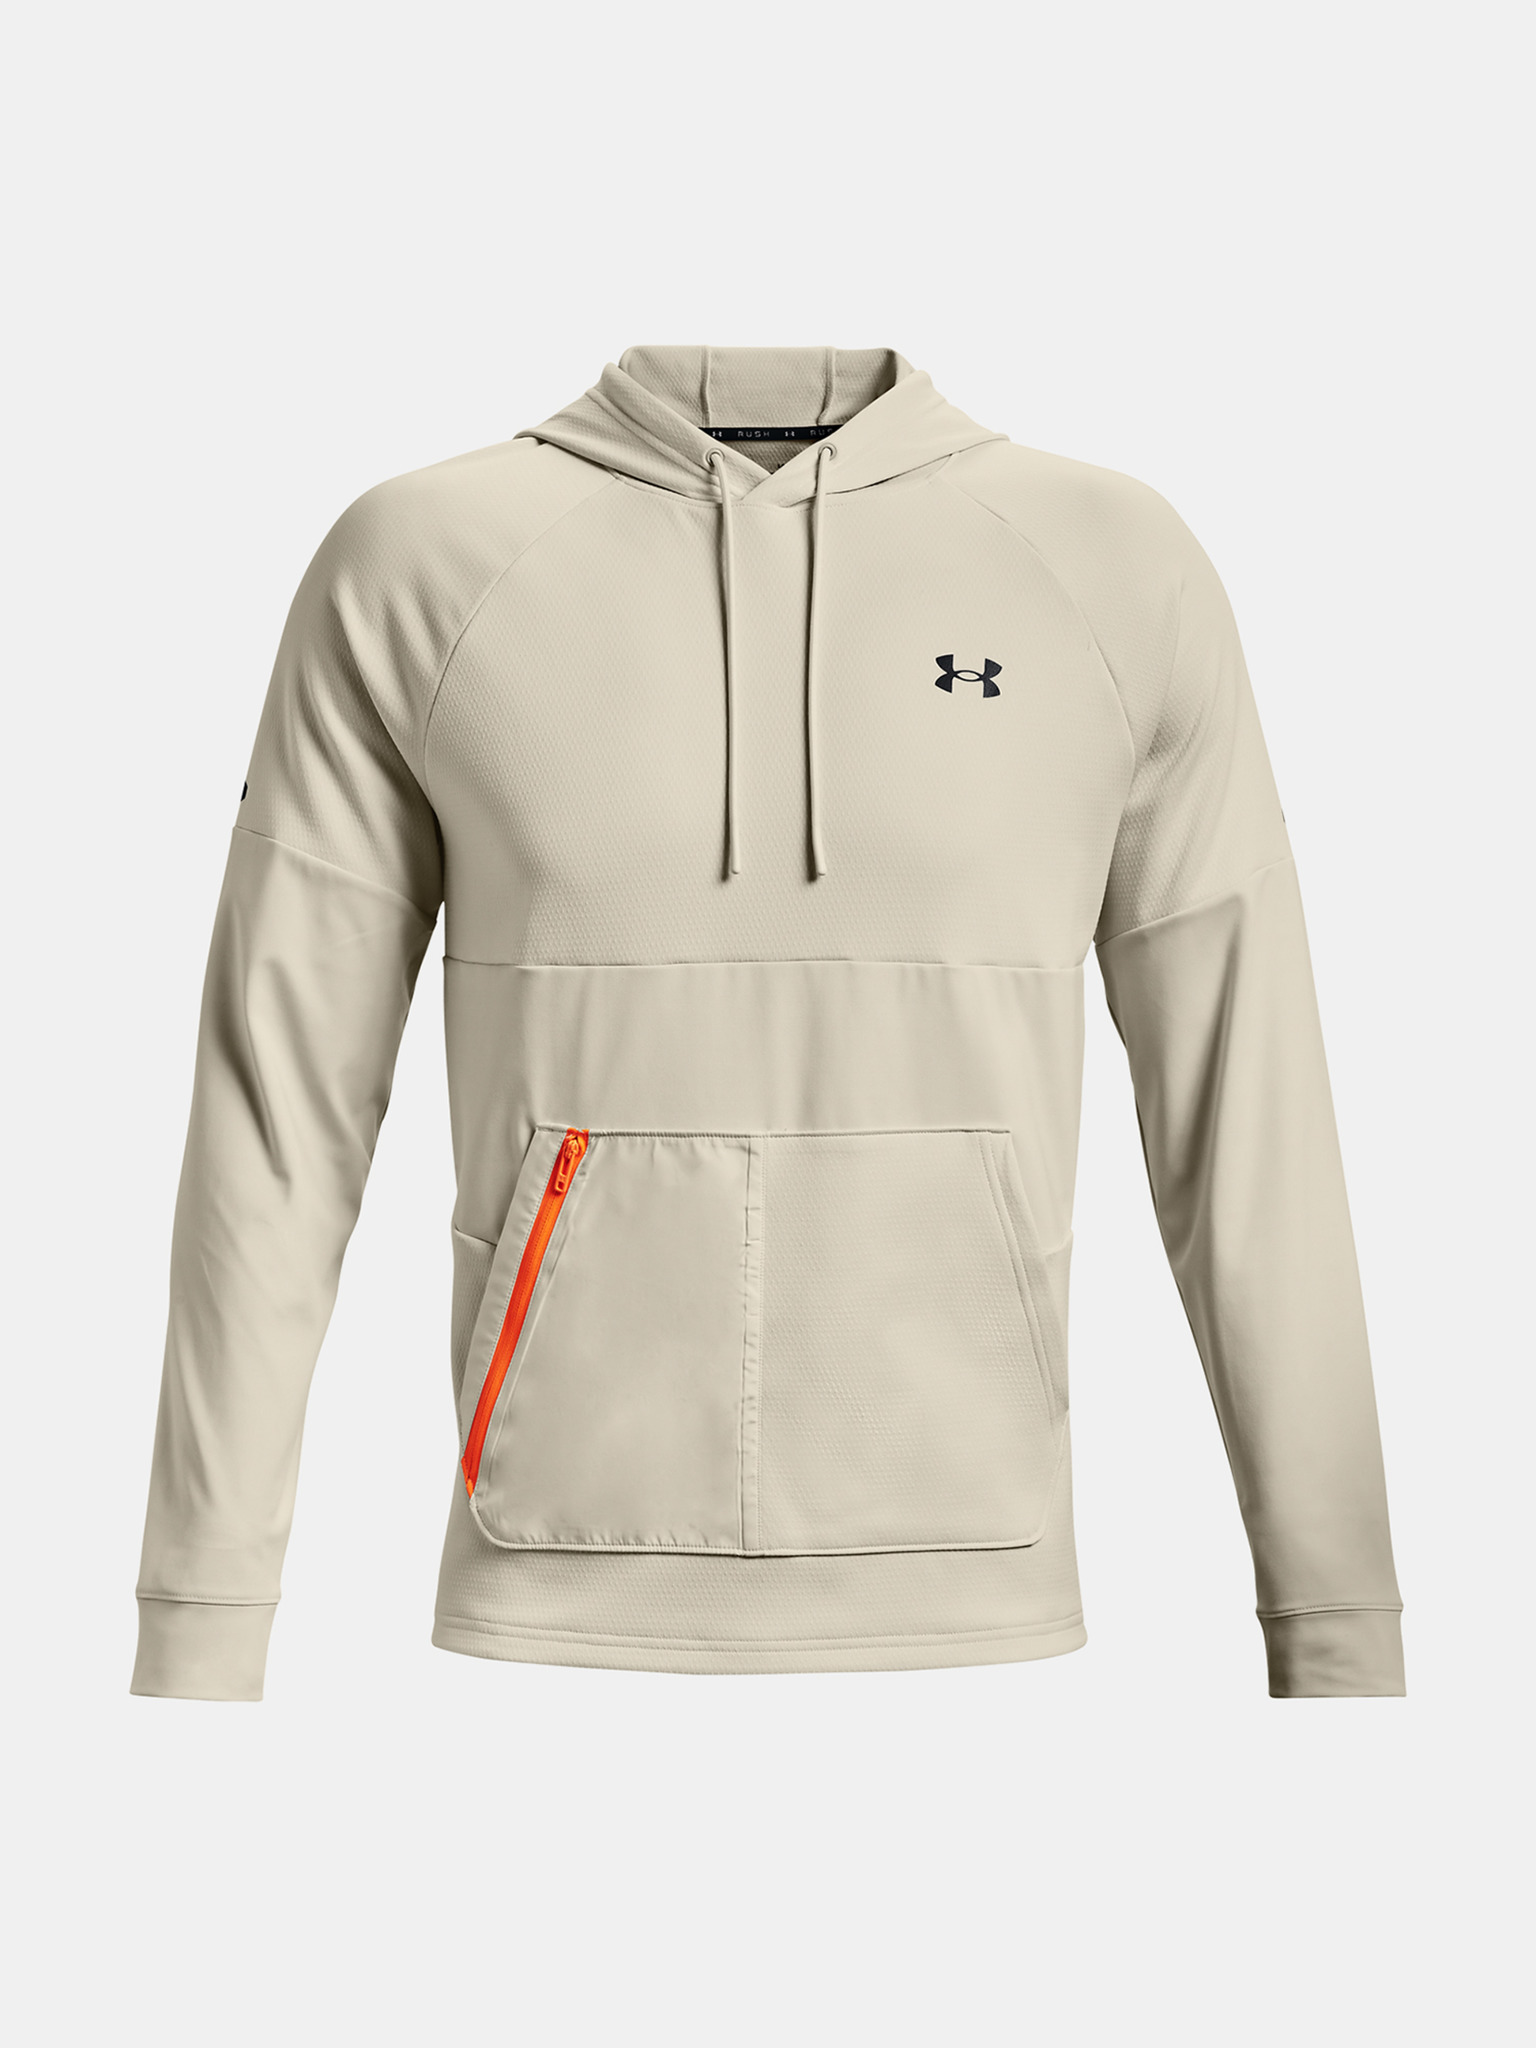 Under Armour Men's RUSH All Purpose Pullover Hoodie